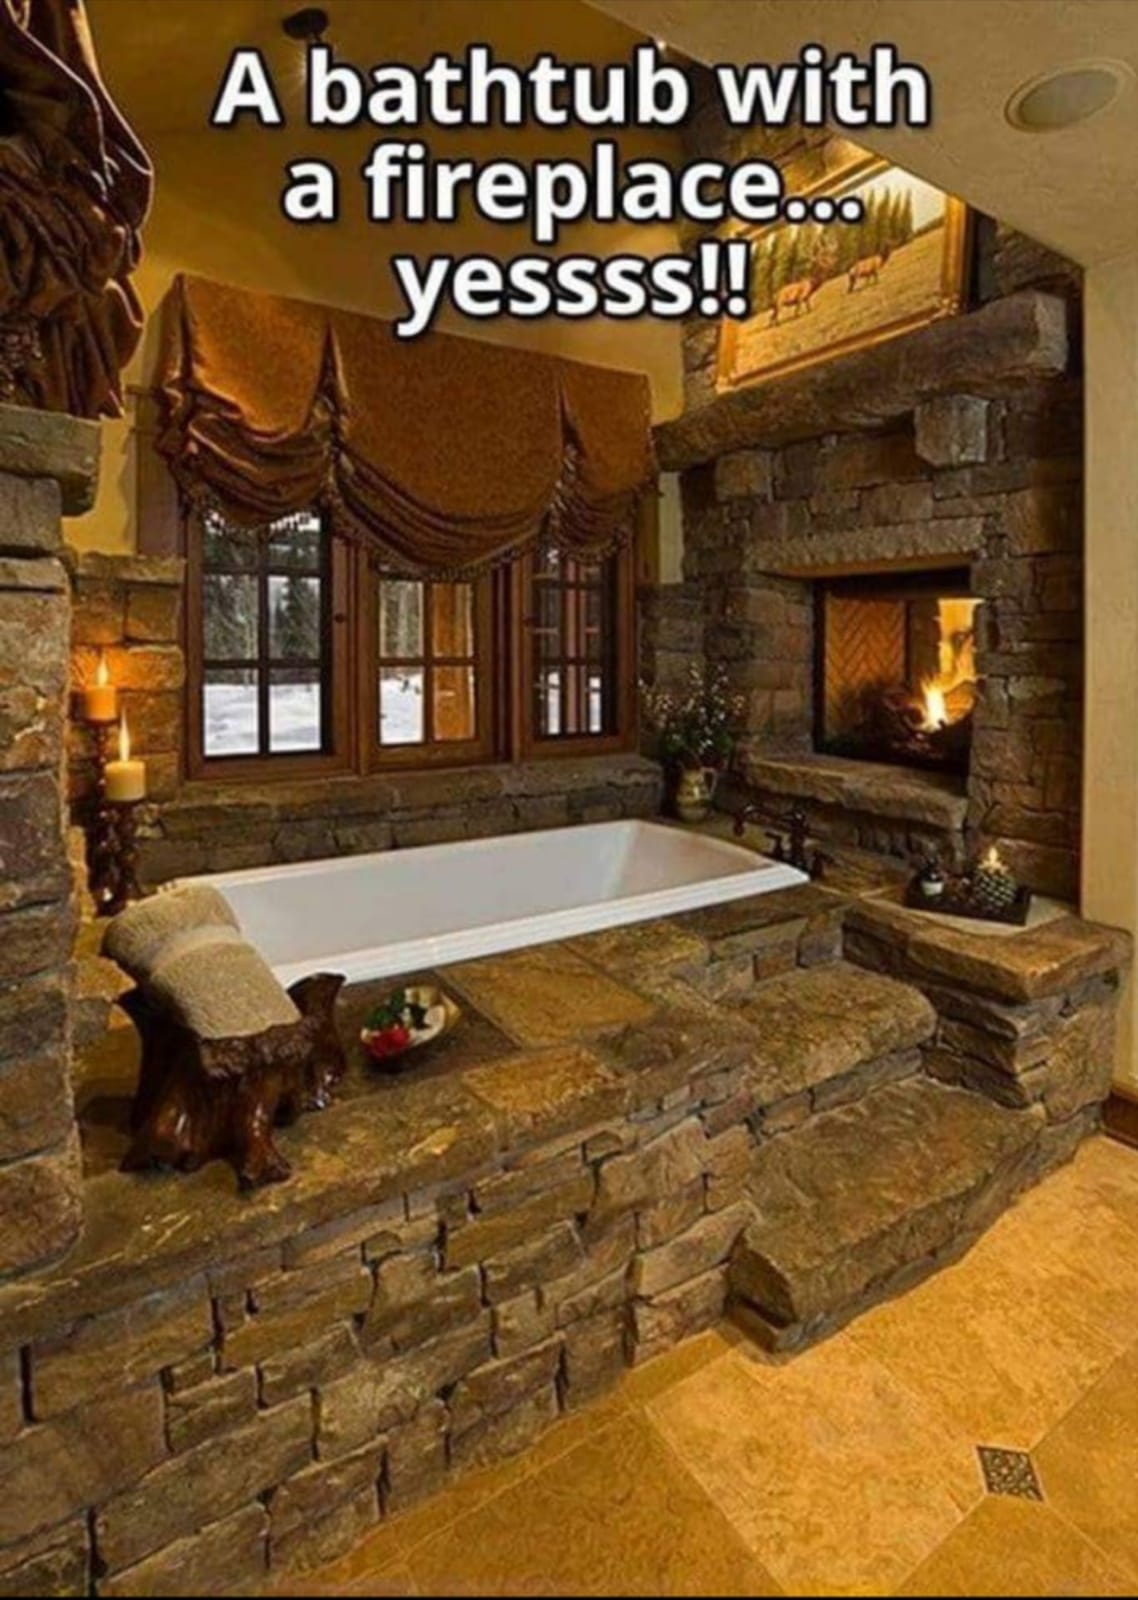 rustic bathroom with fireplace - A bathtub with a fireplace... yessss!!